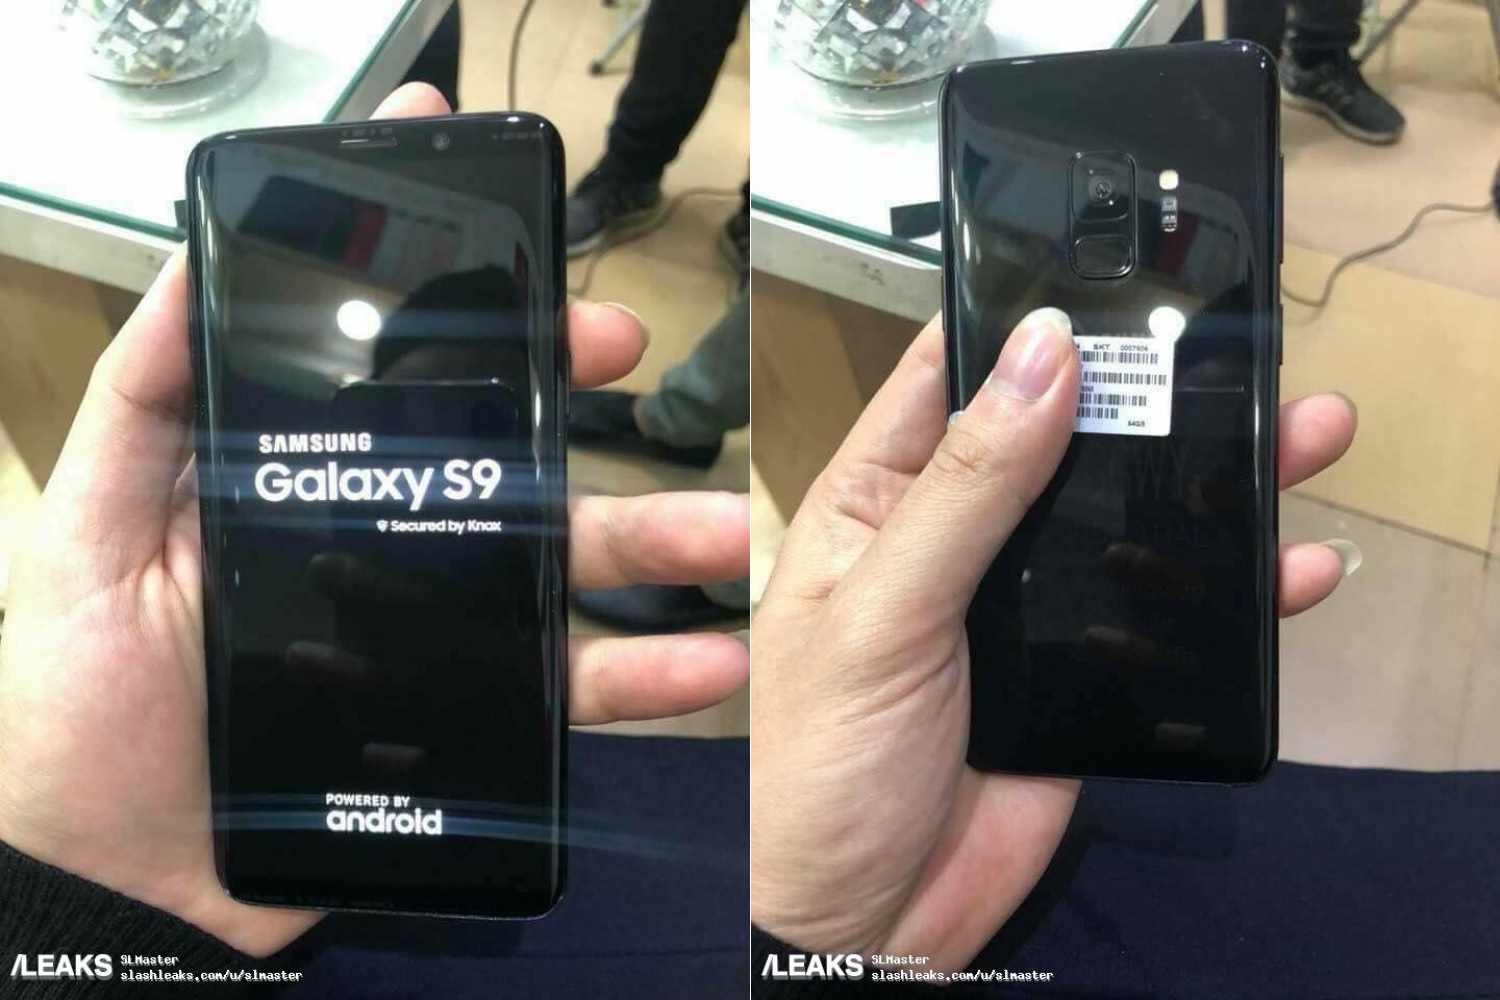 Samsung Galaxy S9 hands-on images